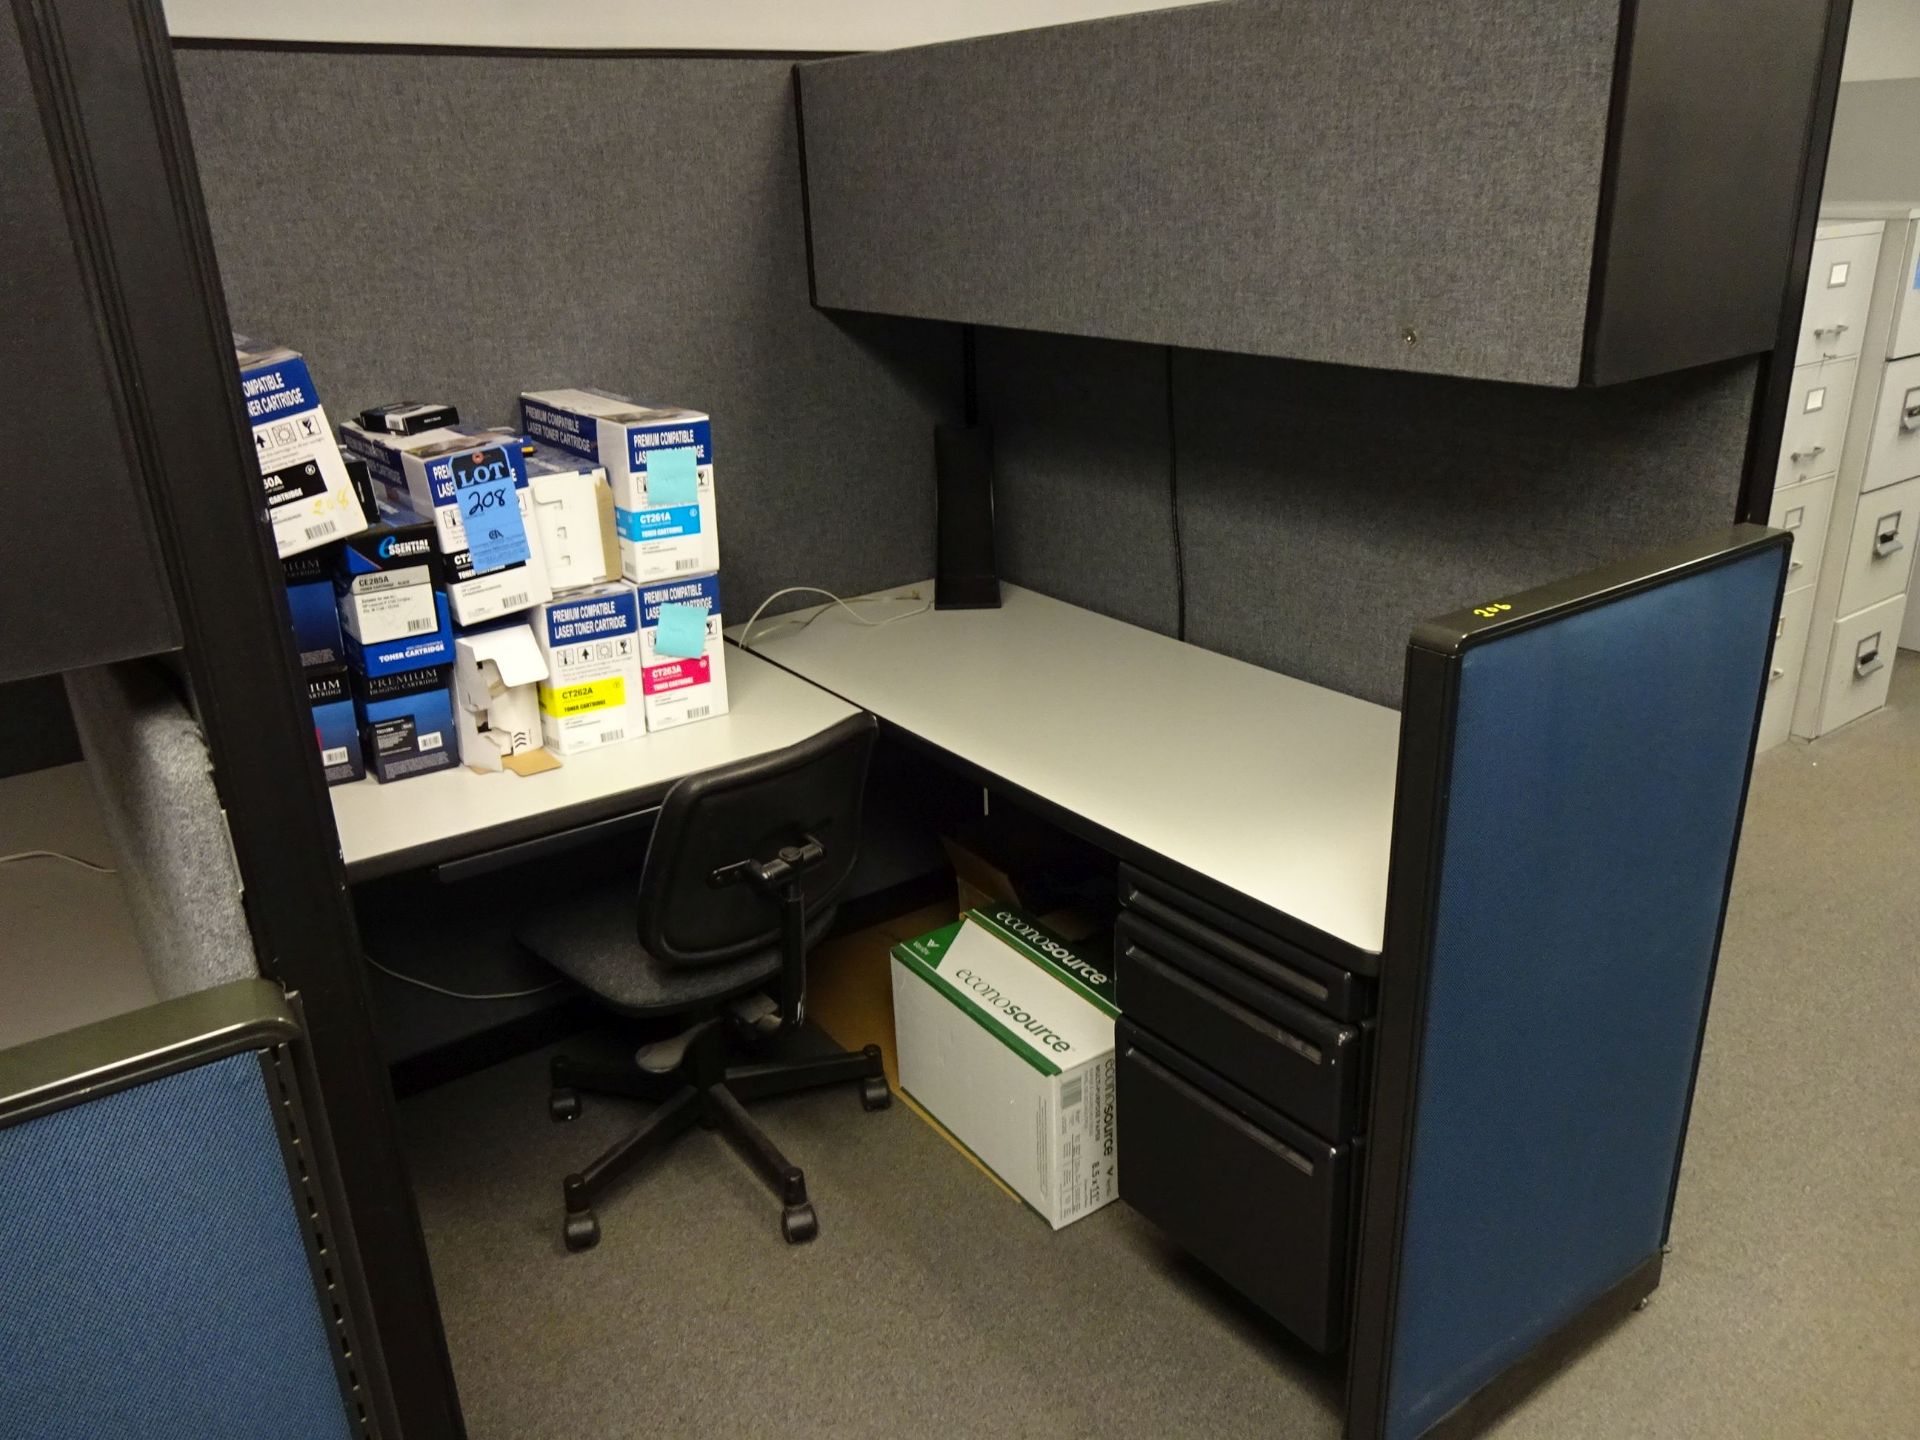 (LOT) HERMAN MILLER 3-PERSON CUBICLE SET UP, 5' X 18' OVERALL FOOTPRINT - Image 4 of 4